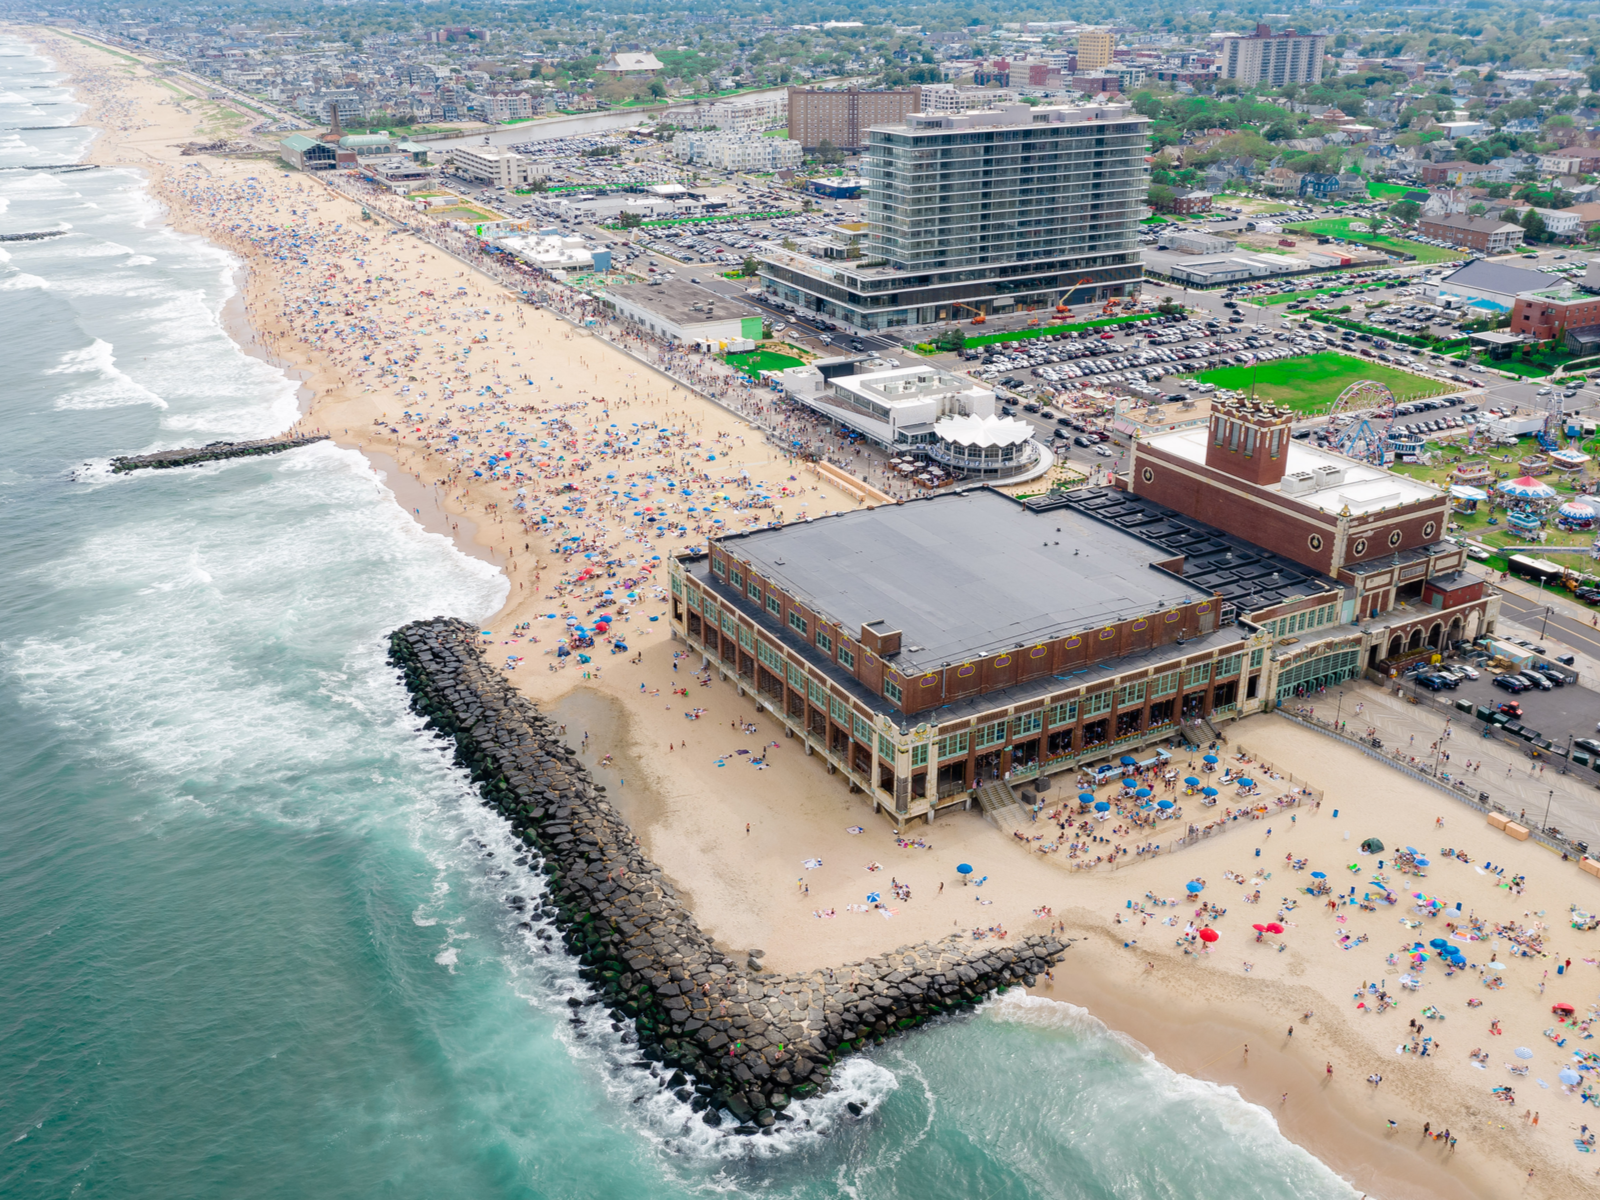 Aerial view on the crowded Asbury Park Beach in New Jersey on a holiday weekend, one of the best beaches on the East Coast